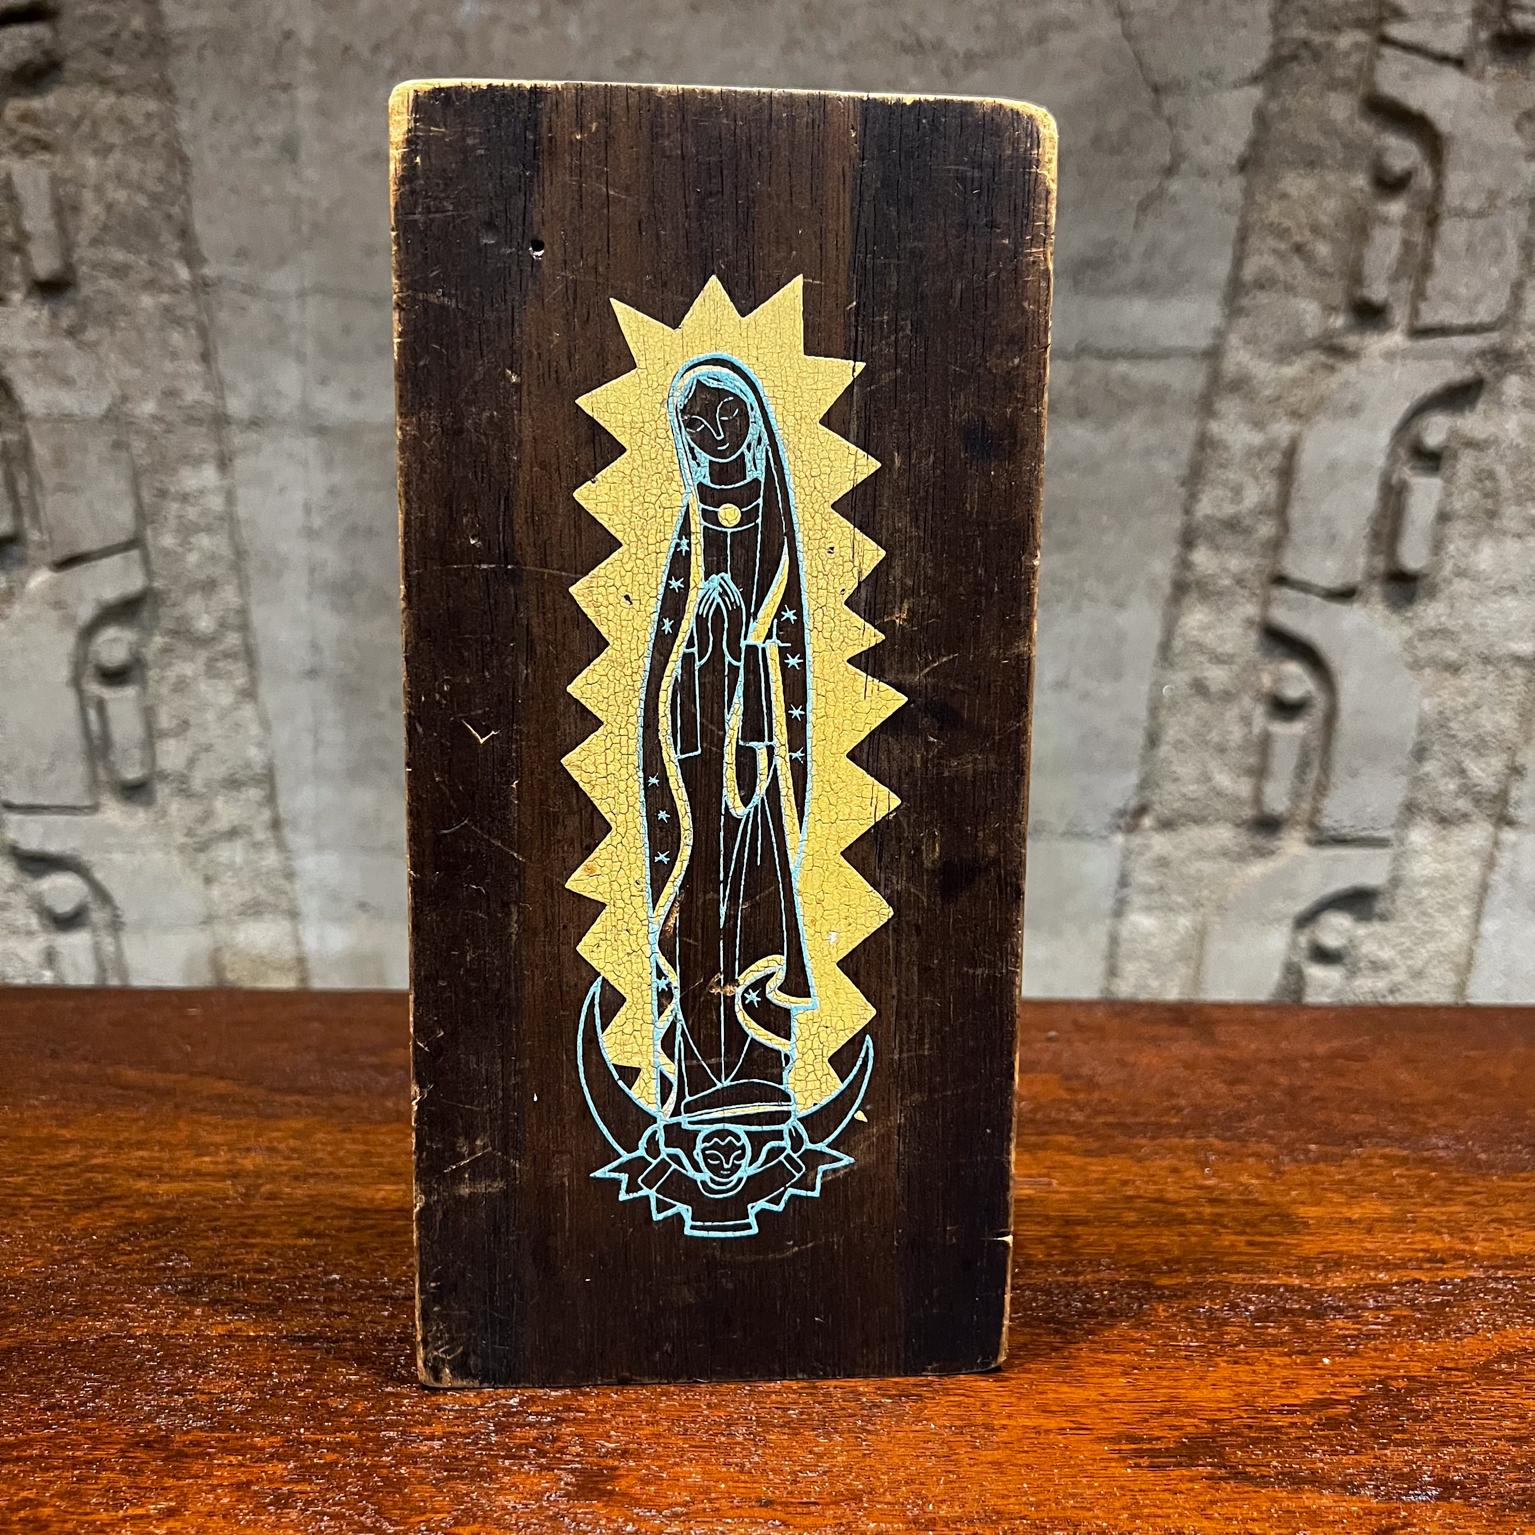 1970s by Emaus Monks Abstract Virgin Mary Art Cuernavaca, Mexico
Painted Wall Art Panel Mahogany Wood
Maker stamp on backside
10 tall x 5 w x .75 thick
Original vintage unrestored condition. Wear is visible.
Please expect vintage condition, refer to